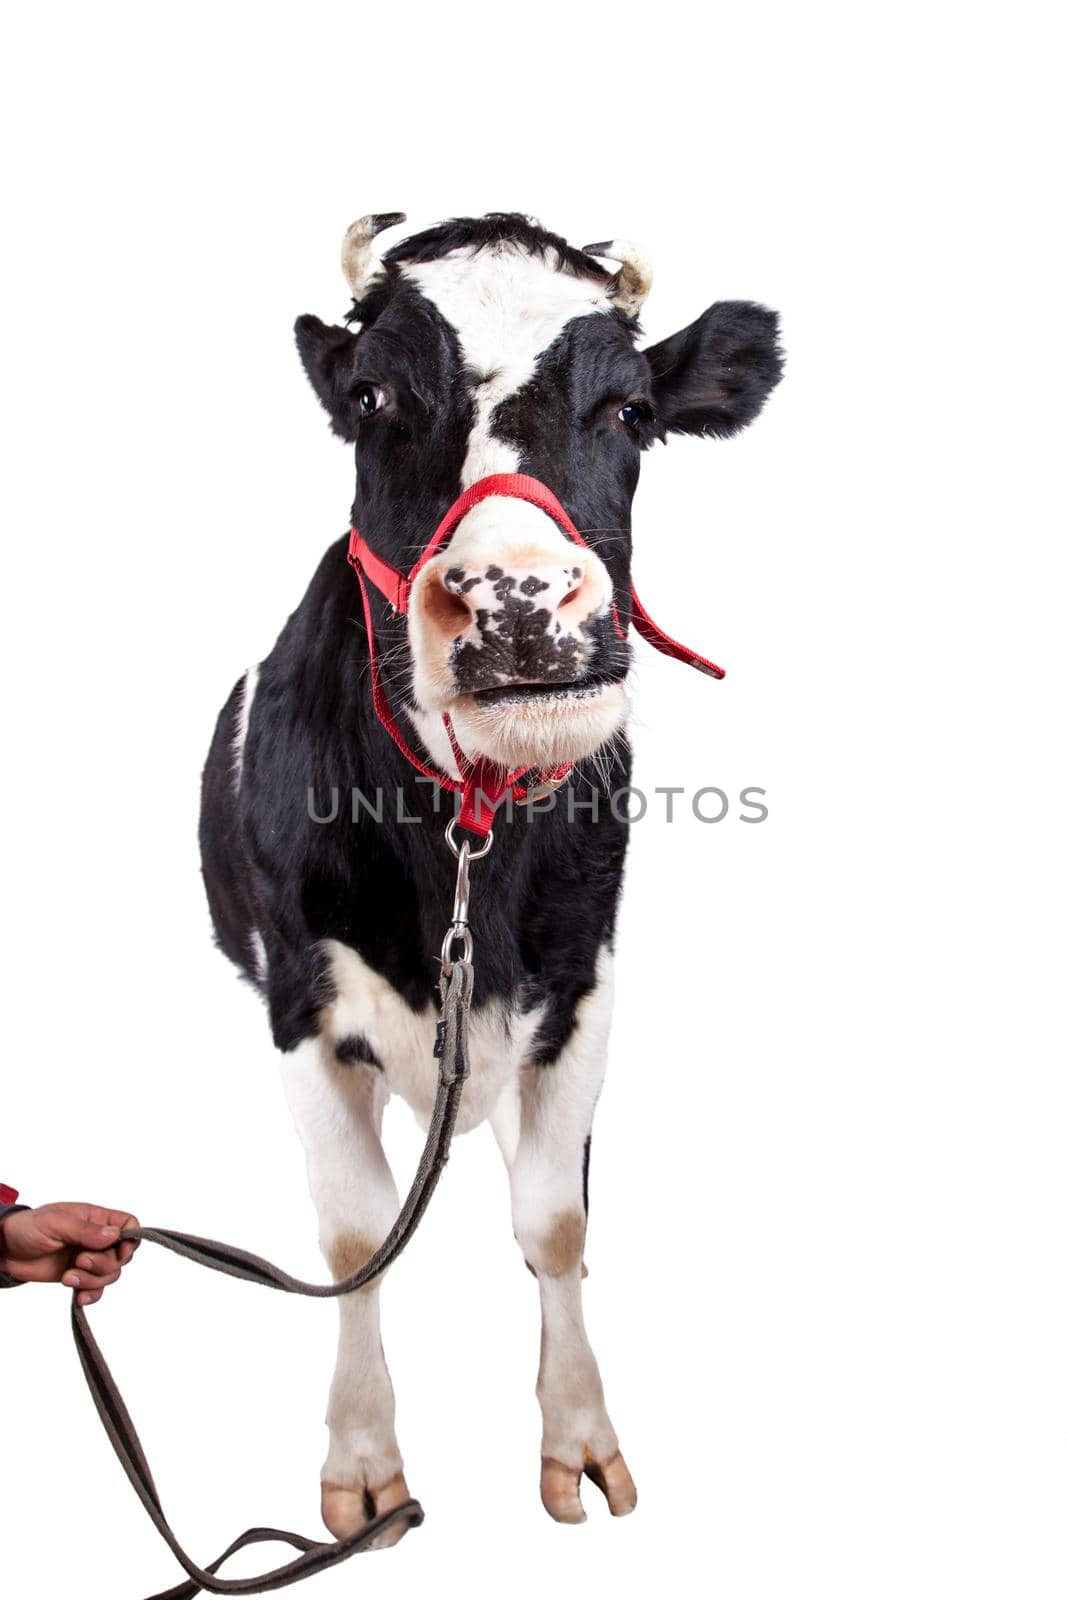 Black and white cow on white background by RosaJay